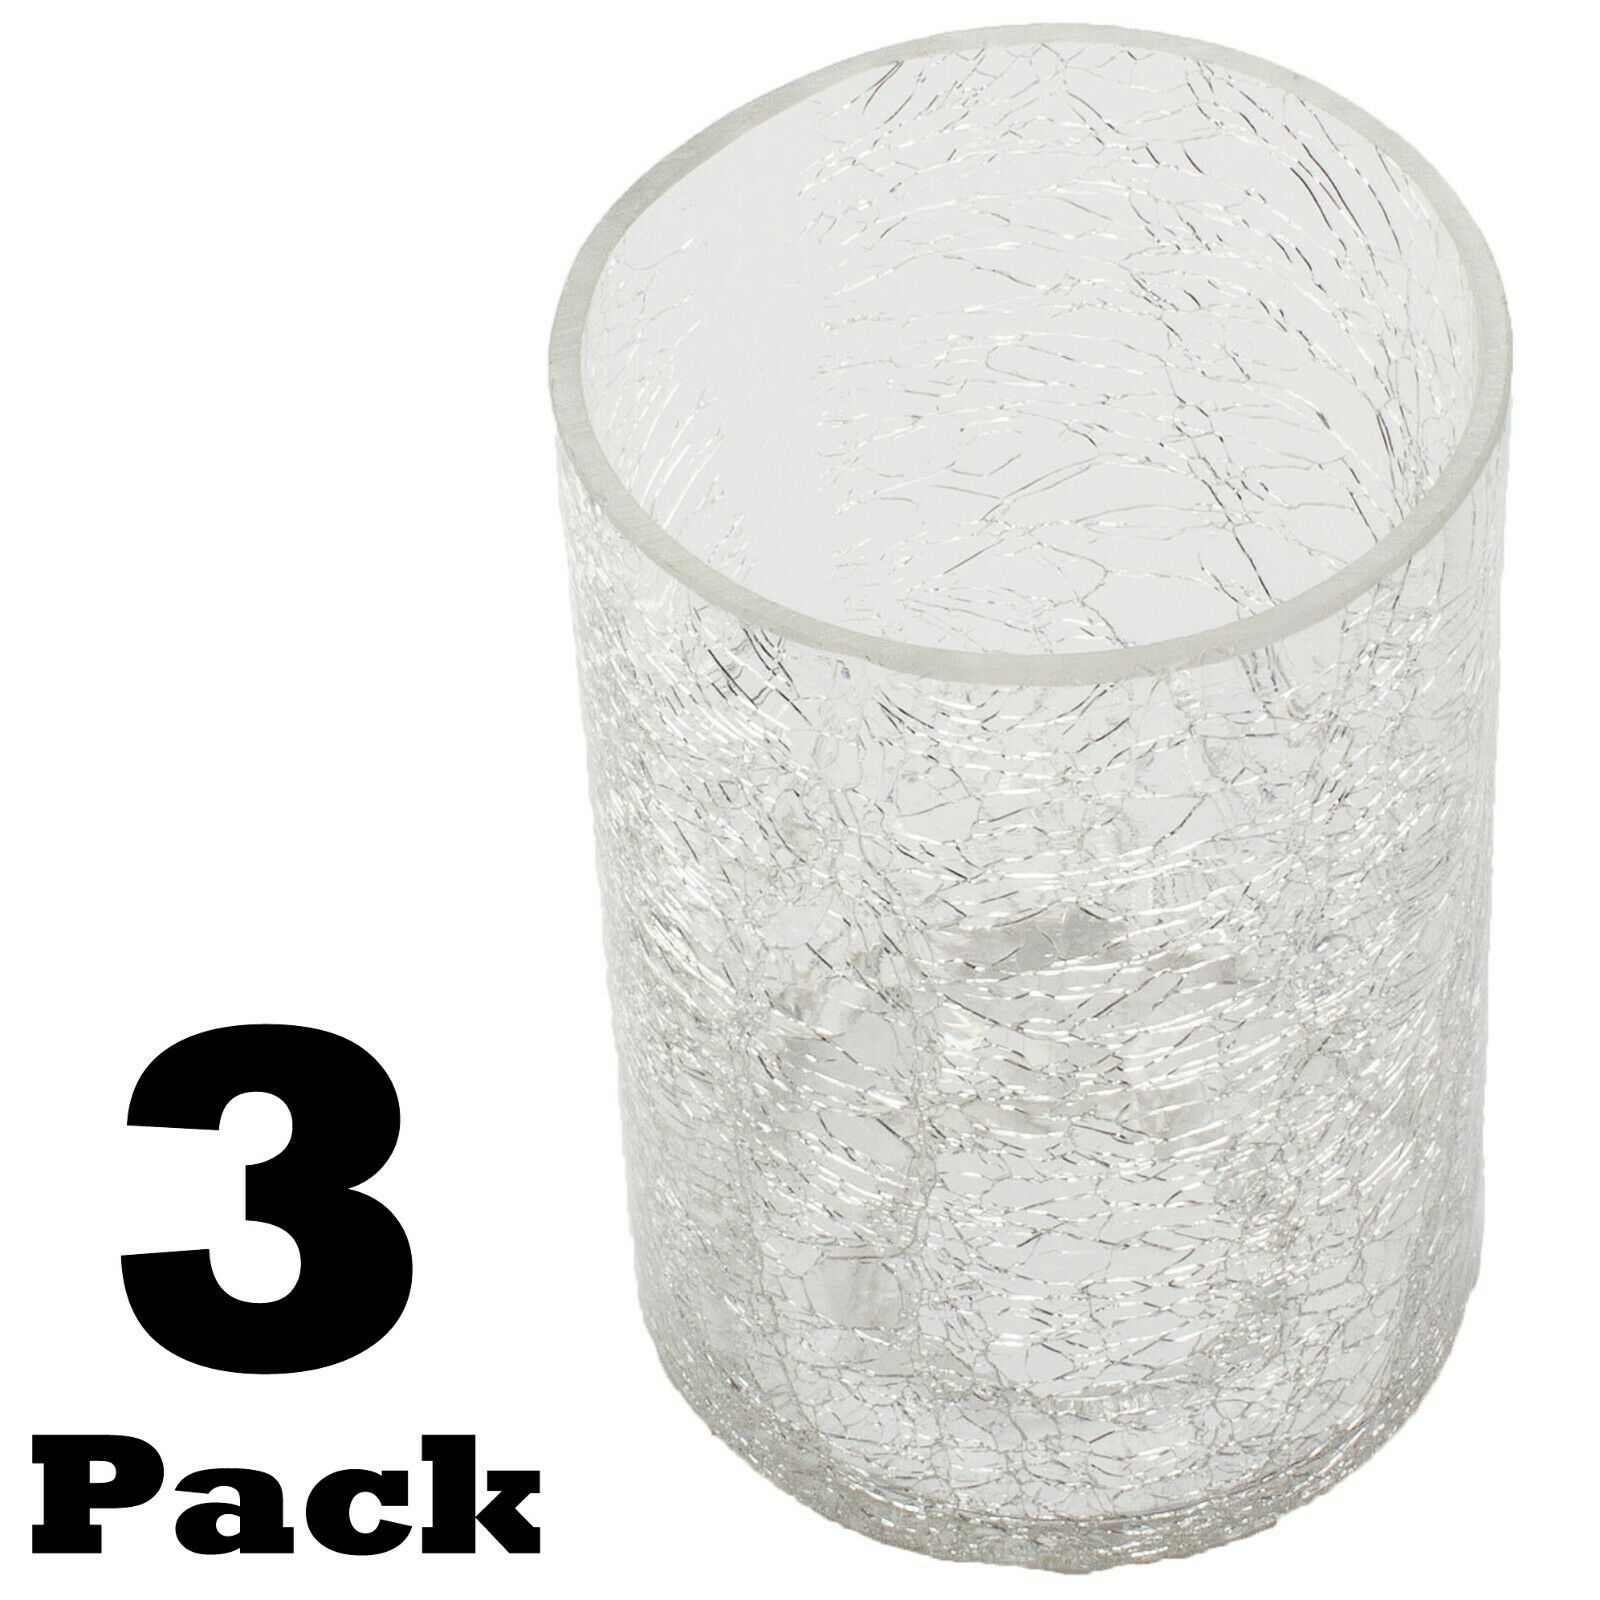 Crack Effect Glass Shade 3 Pack Crackle Clear Cylinder for Light Fixture Pendant